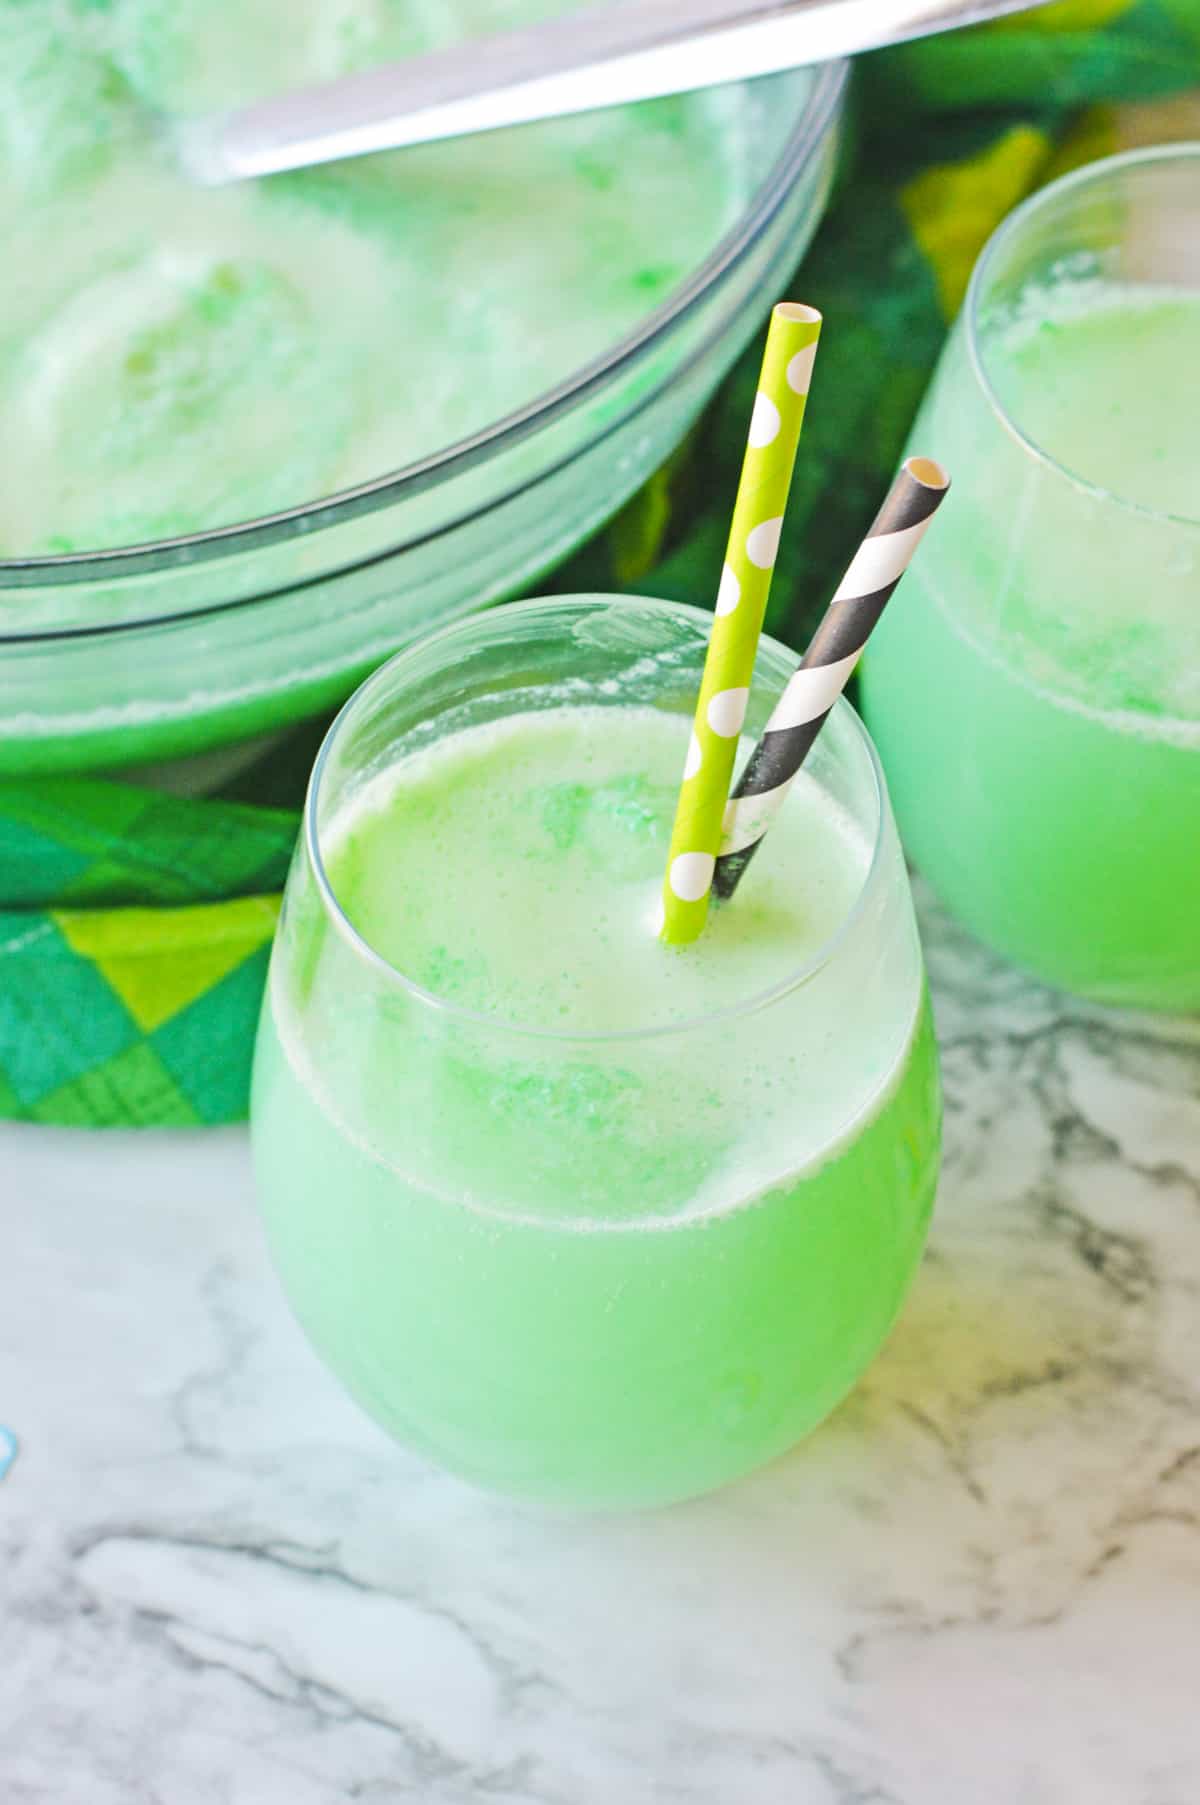 St. Patrick's Day Alcoholic Punch in stemless wine glass with two paper straws and punch bowl filled with green punch behind it.